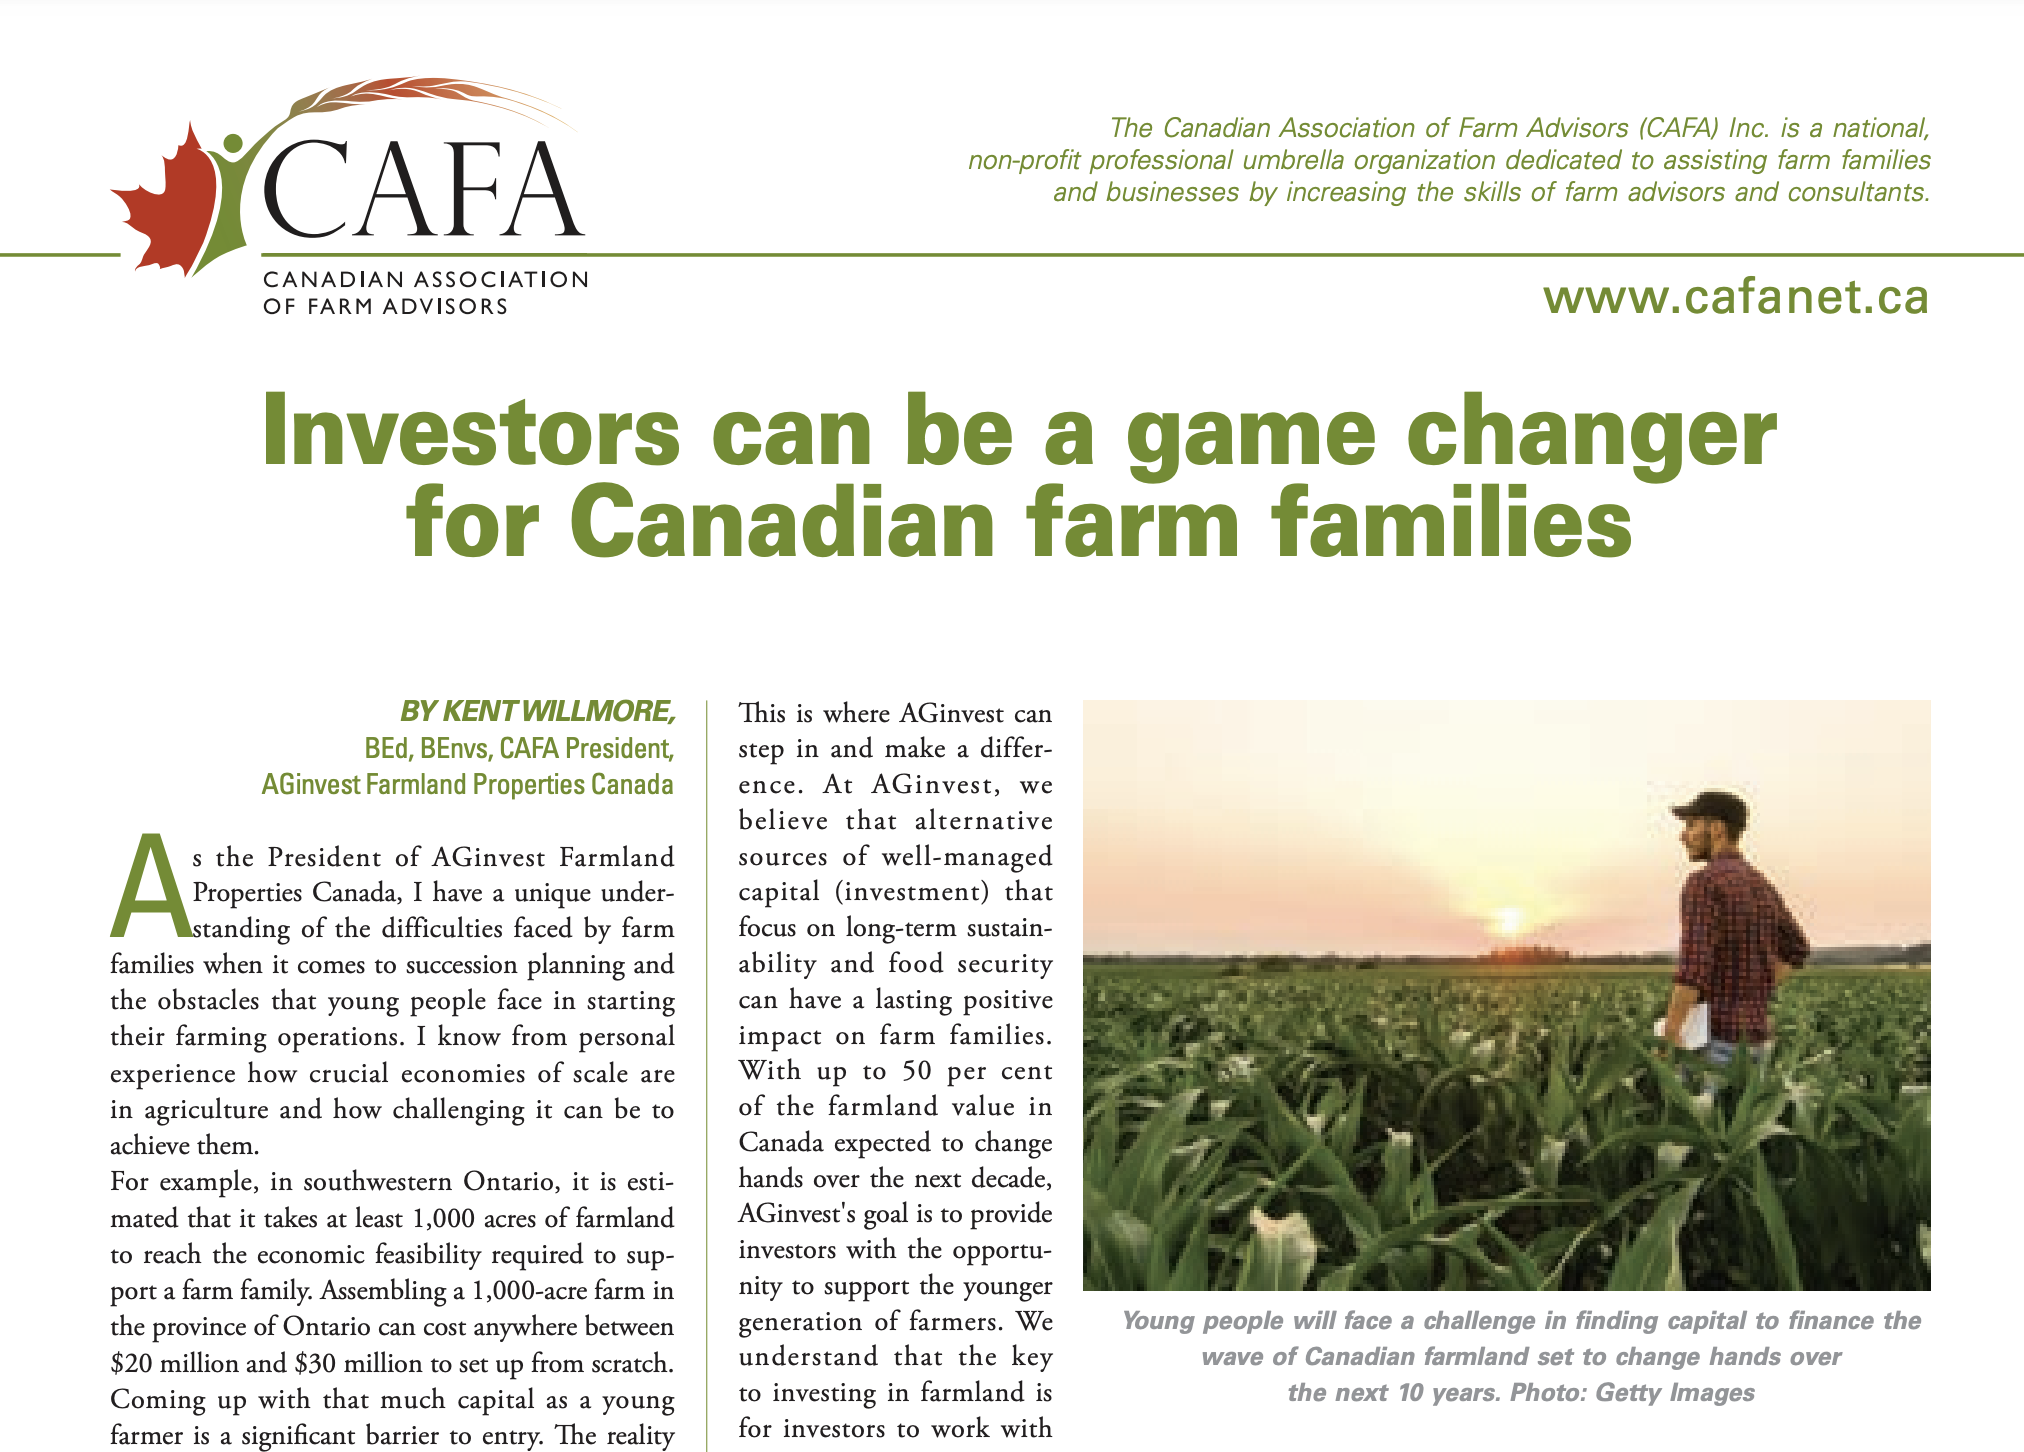 Featured image for “Investors can be a game changer for Canadian farm families.”